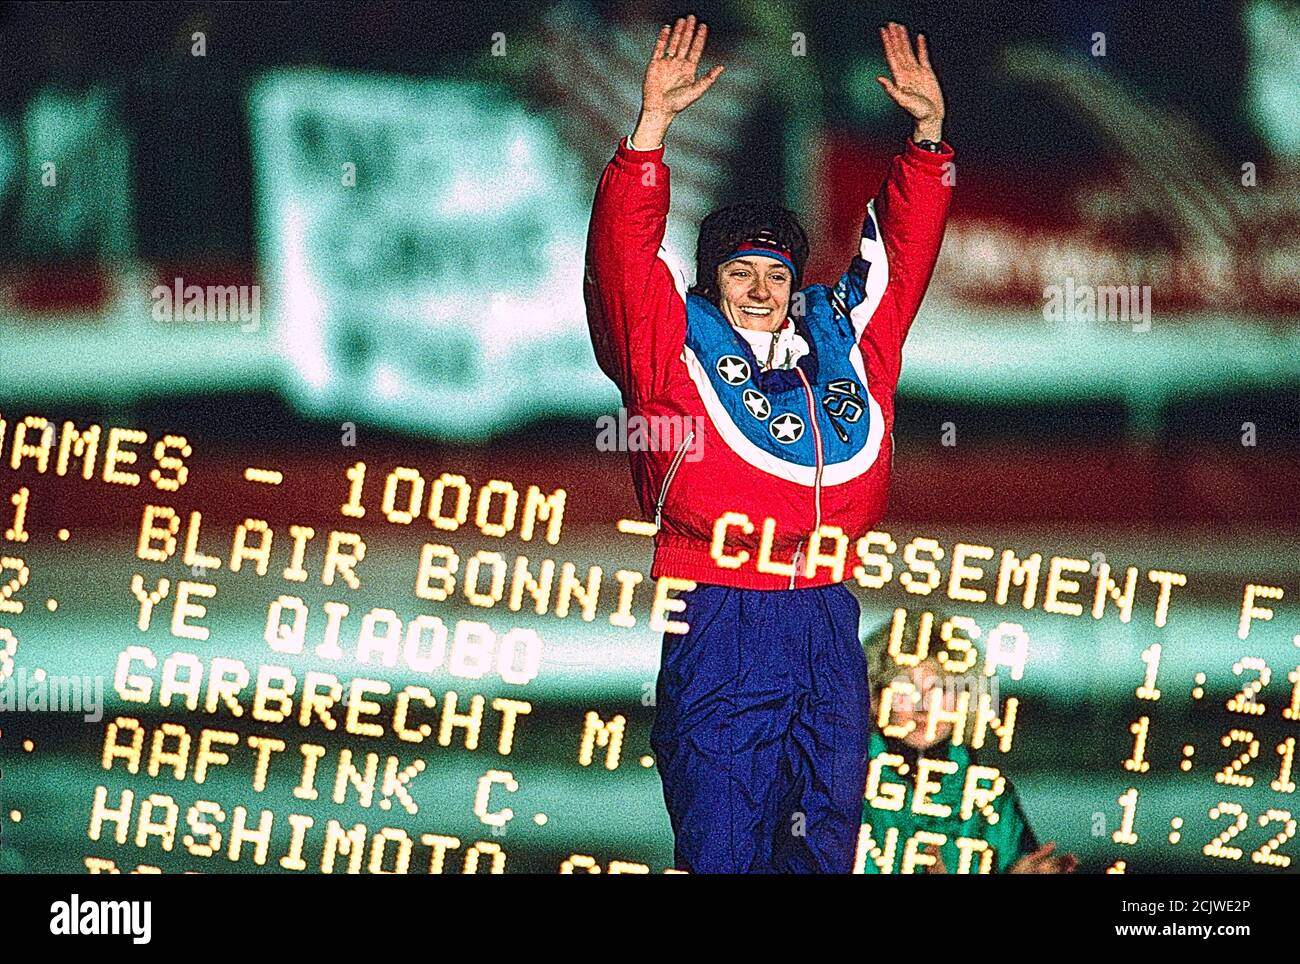 Bonnie Blair (USA) wins the gold medal in the women's 1000m long track speed skating at the 1992 Olympic Winter Games Stock Photo